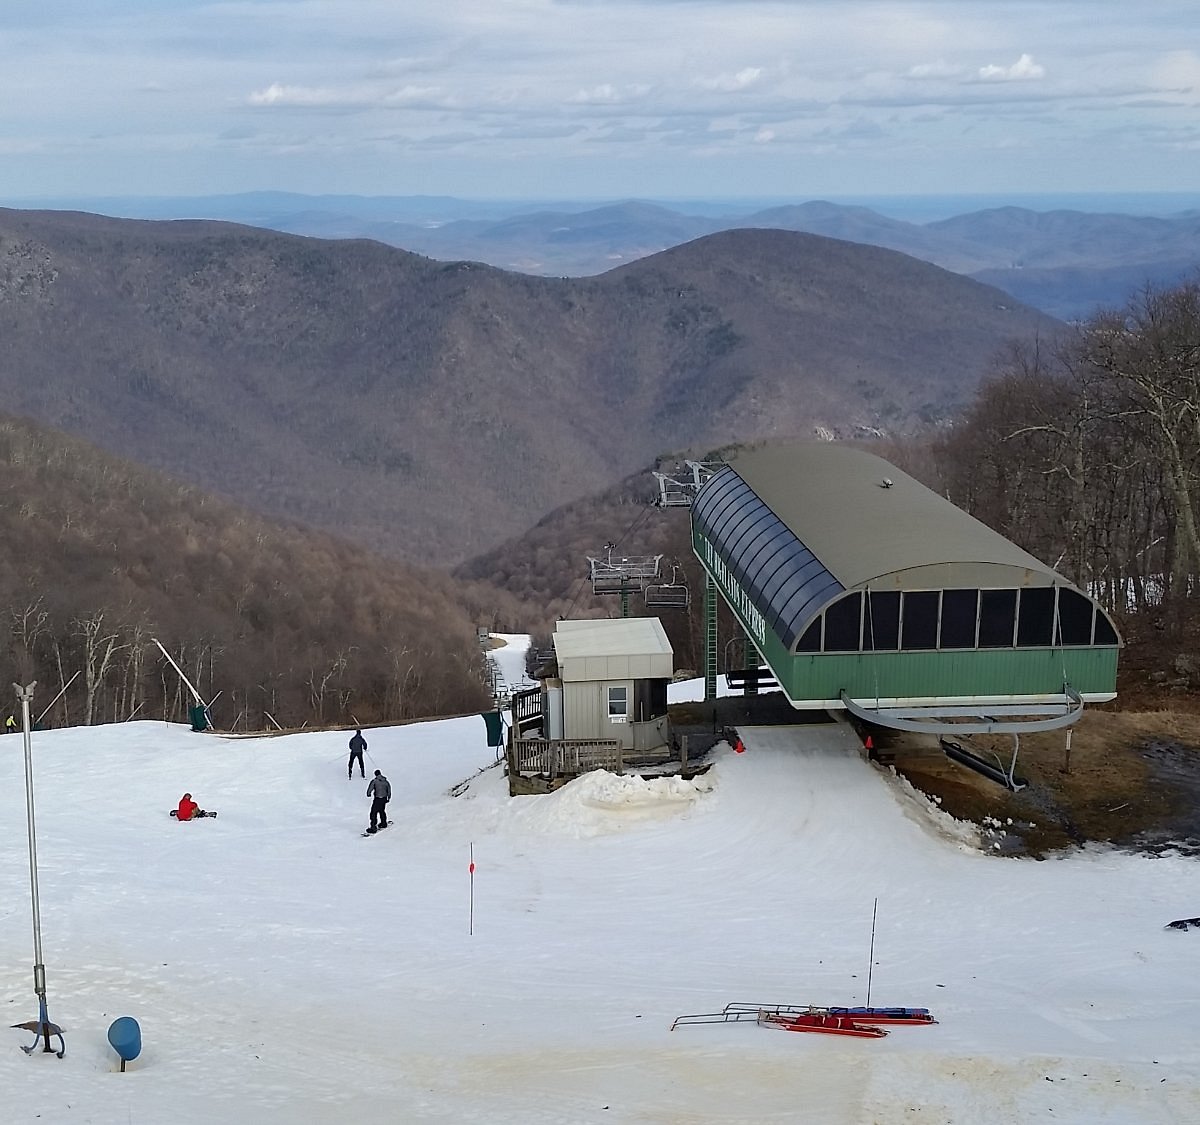 WINTERGREEN SKI AREA All You Need to Know BEFORE You Go